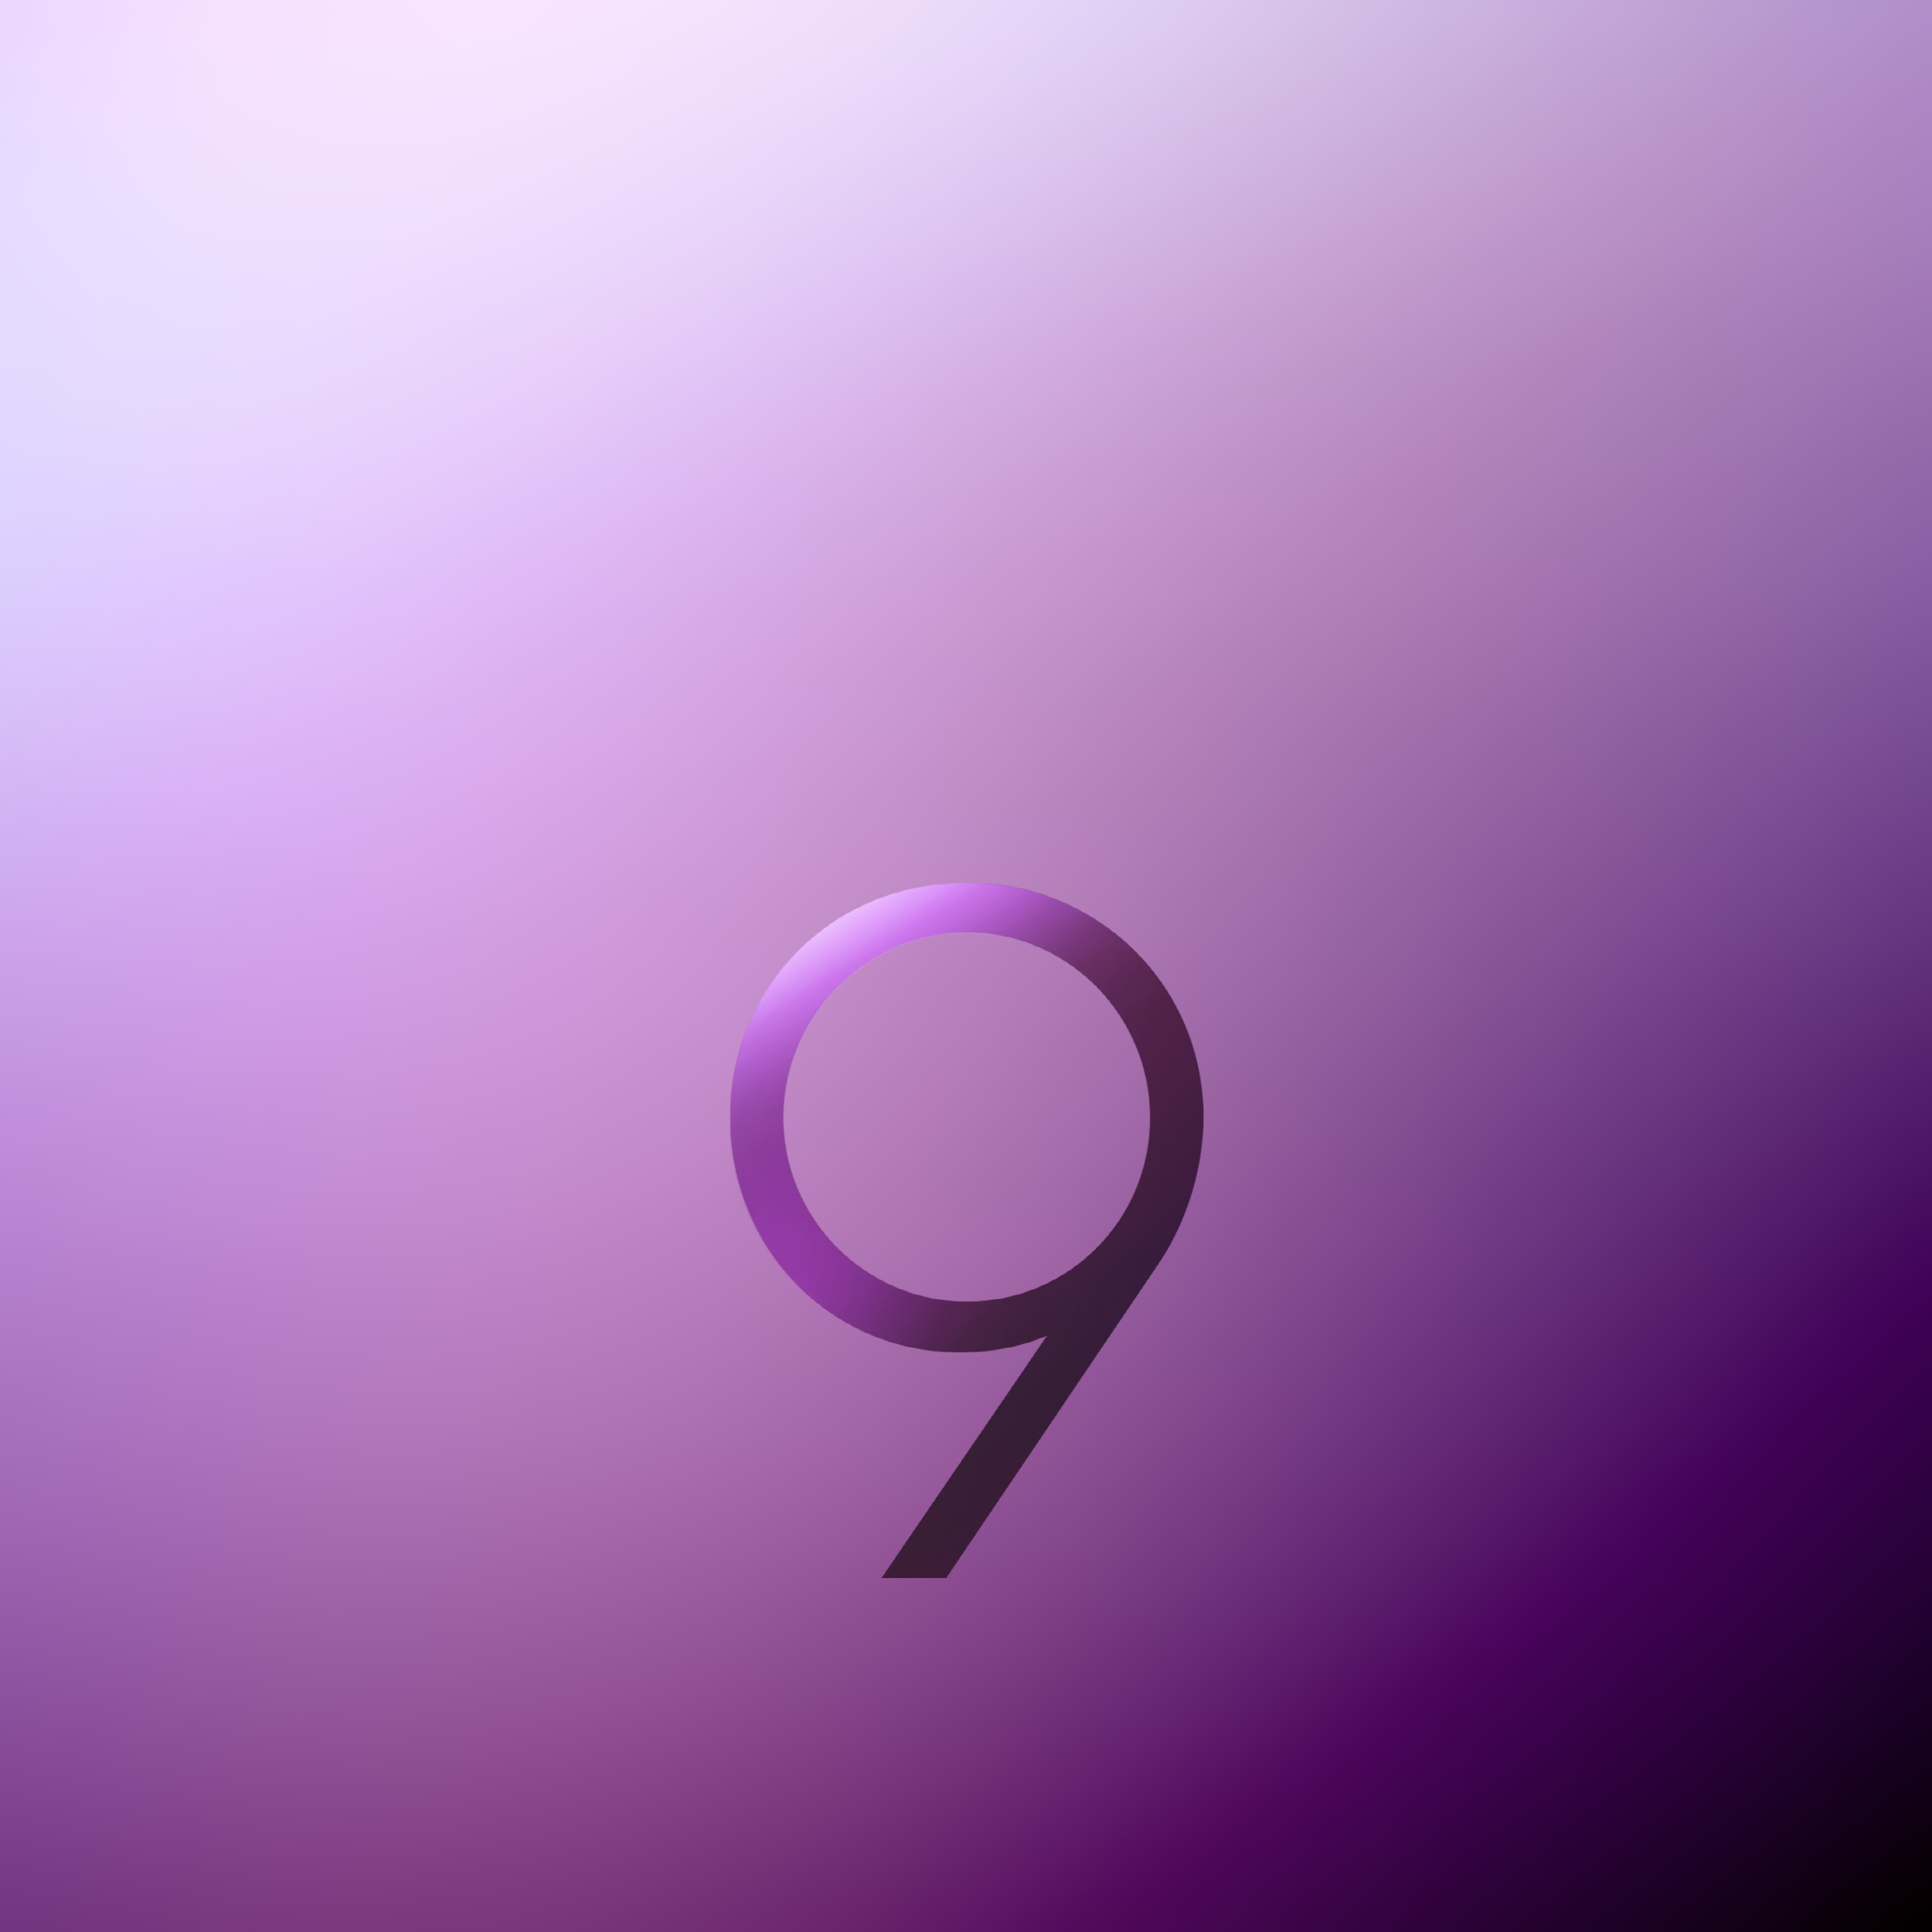 Samsung Galaxy S9 Stock Wallpapers (14)